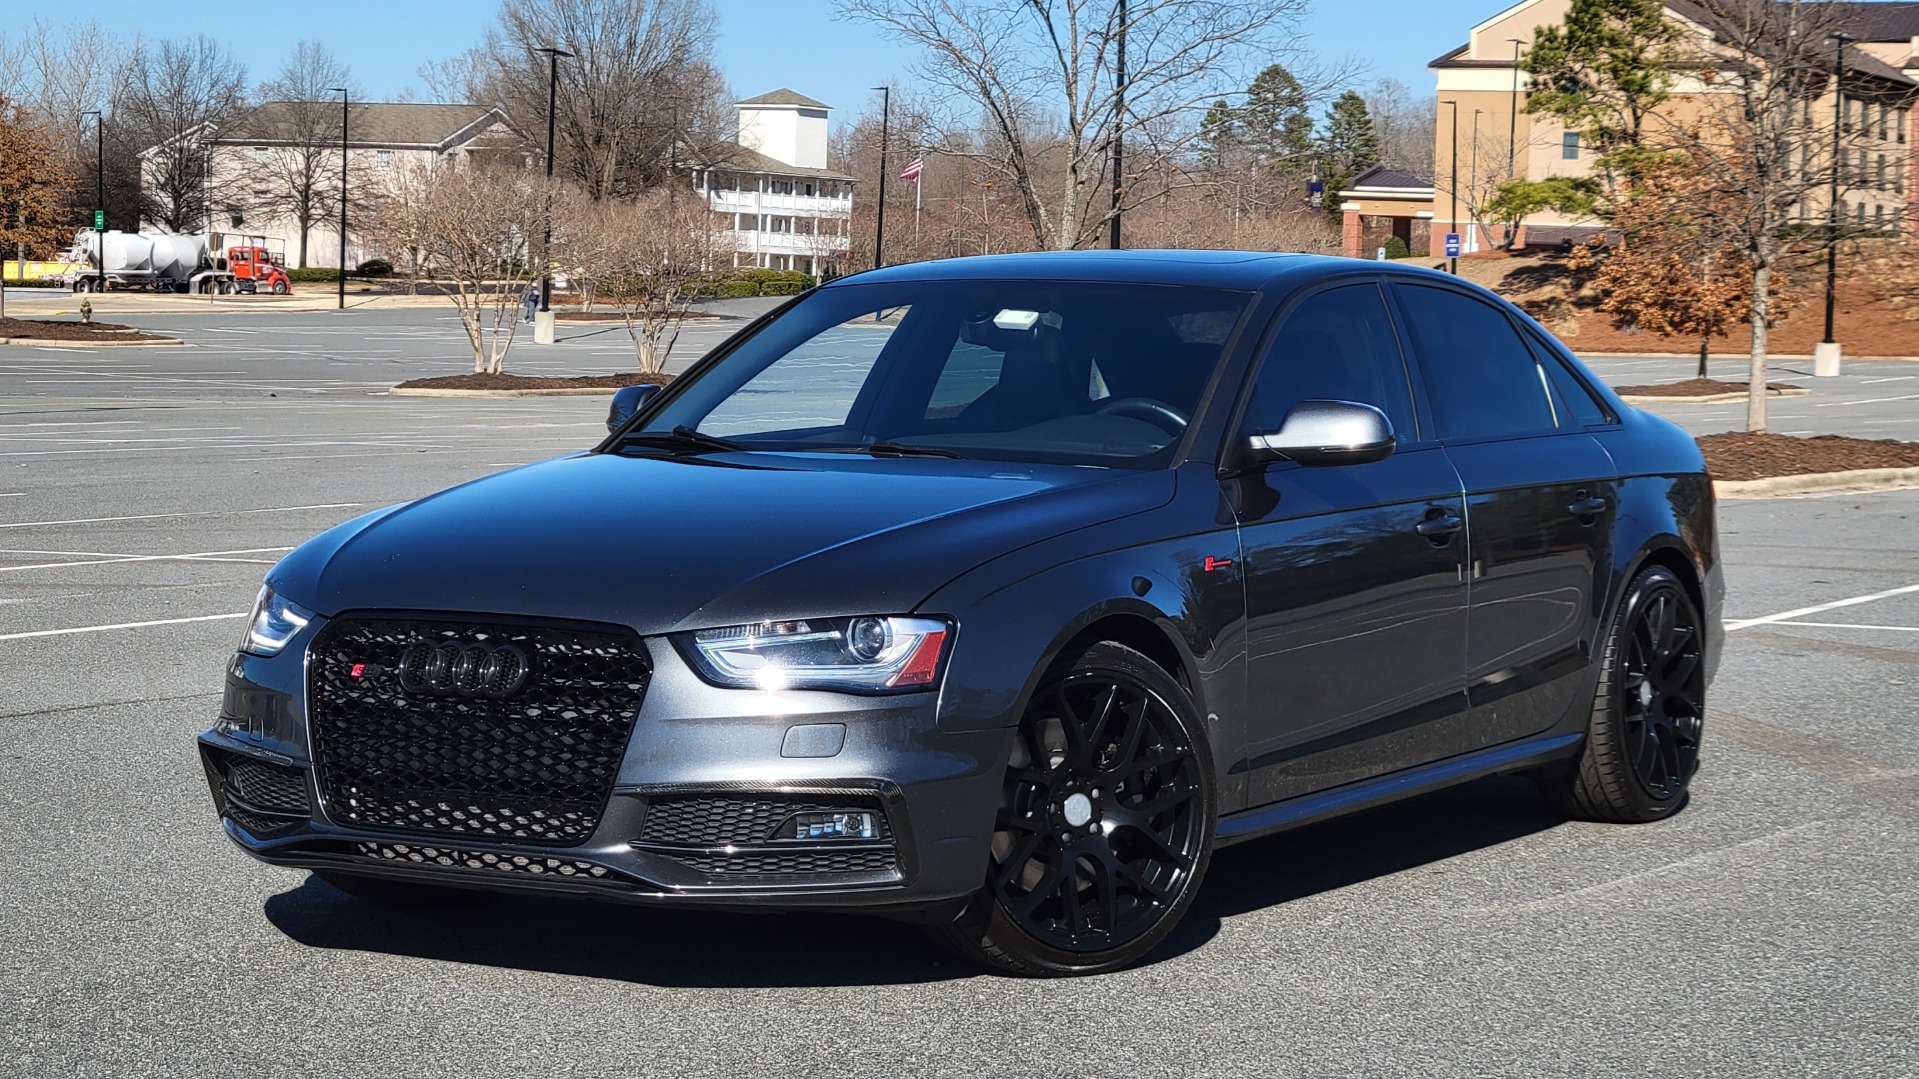 Used 2015 Audi S4 PREMIUM PLUS / TECH PKG / NAV / B&O SOUND / PARK SYS W/REARVIEW for sale Sold at Formula Imports in Charlotte NC 28227 96